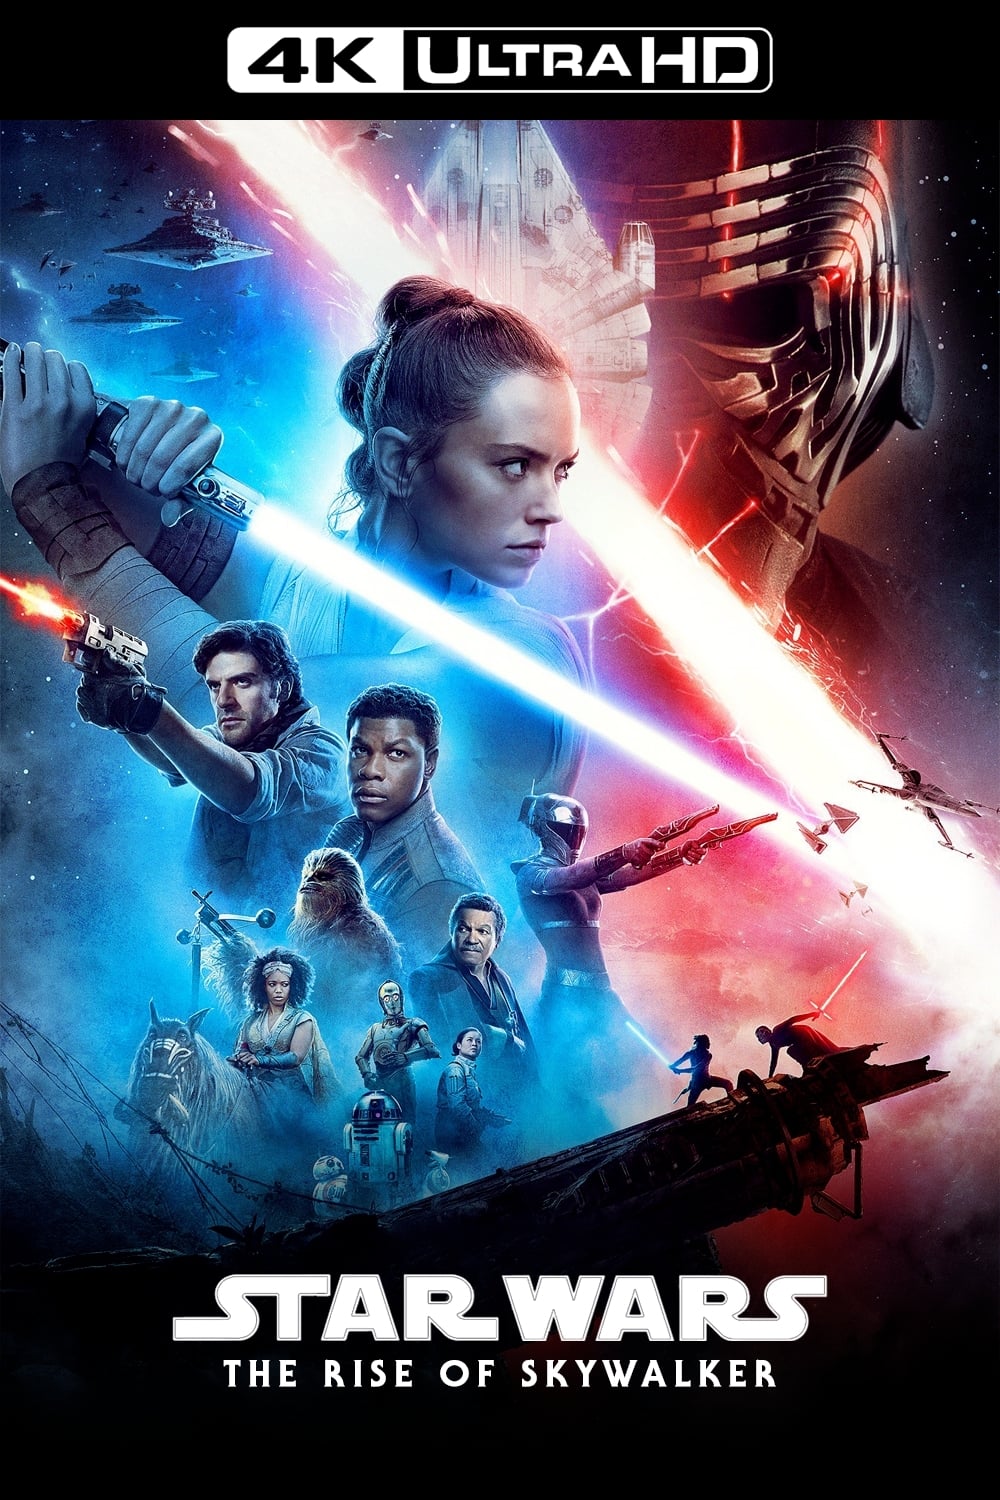 Star Wars: The Rise of Skywalker Movie poster